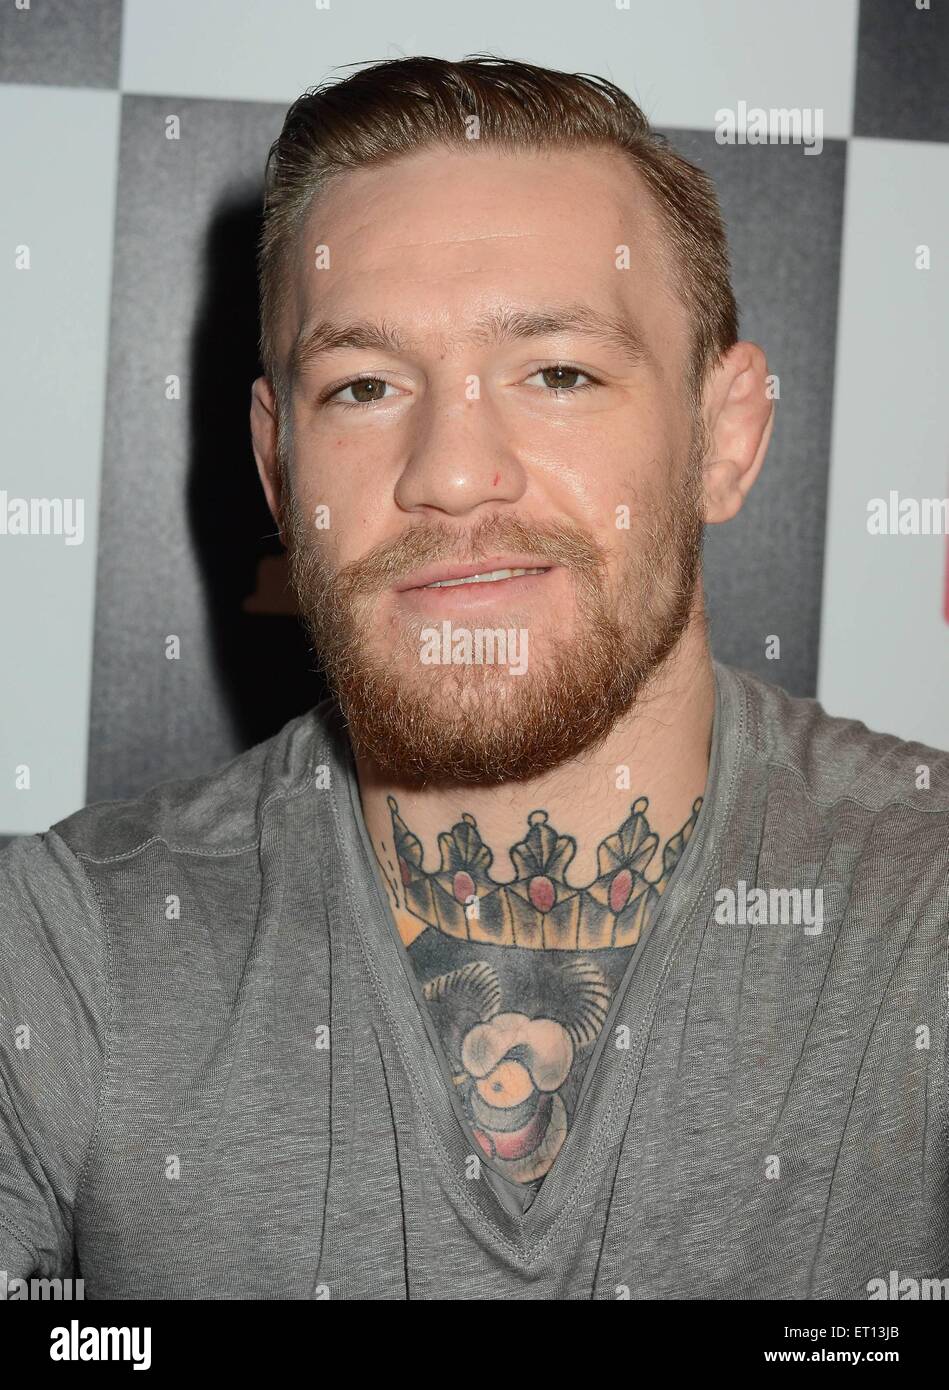 UFC fighter Conor McGregor signs copies of his DVD documentary 'Notorious'  at HMV Featuring: Conor McGregor Where: Dublin, Ireland When: 06 Dec 2014  Credit: WENN.com Stock Photo - Alamy